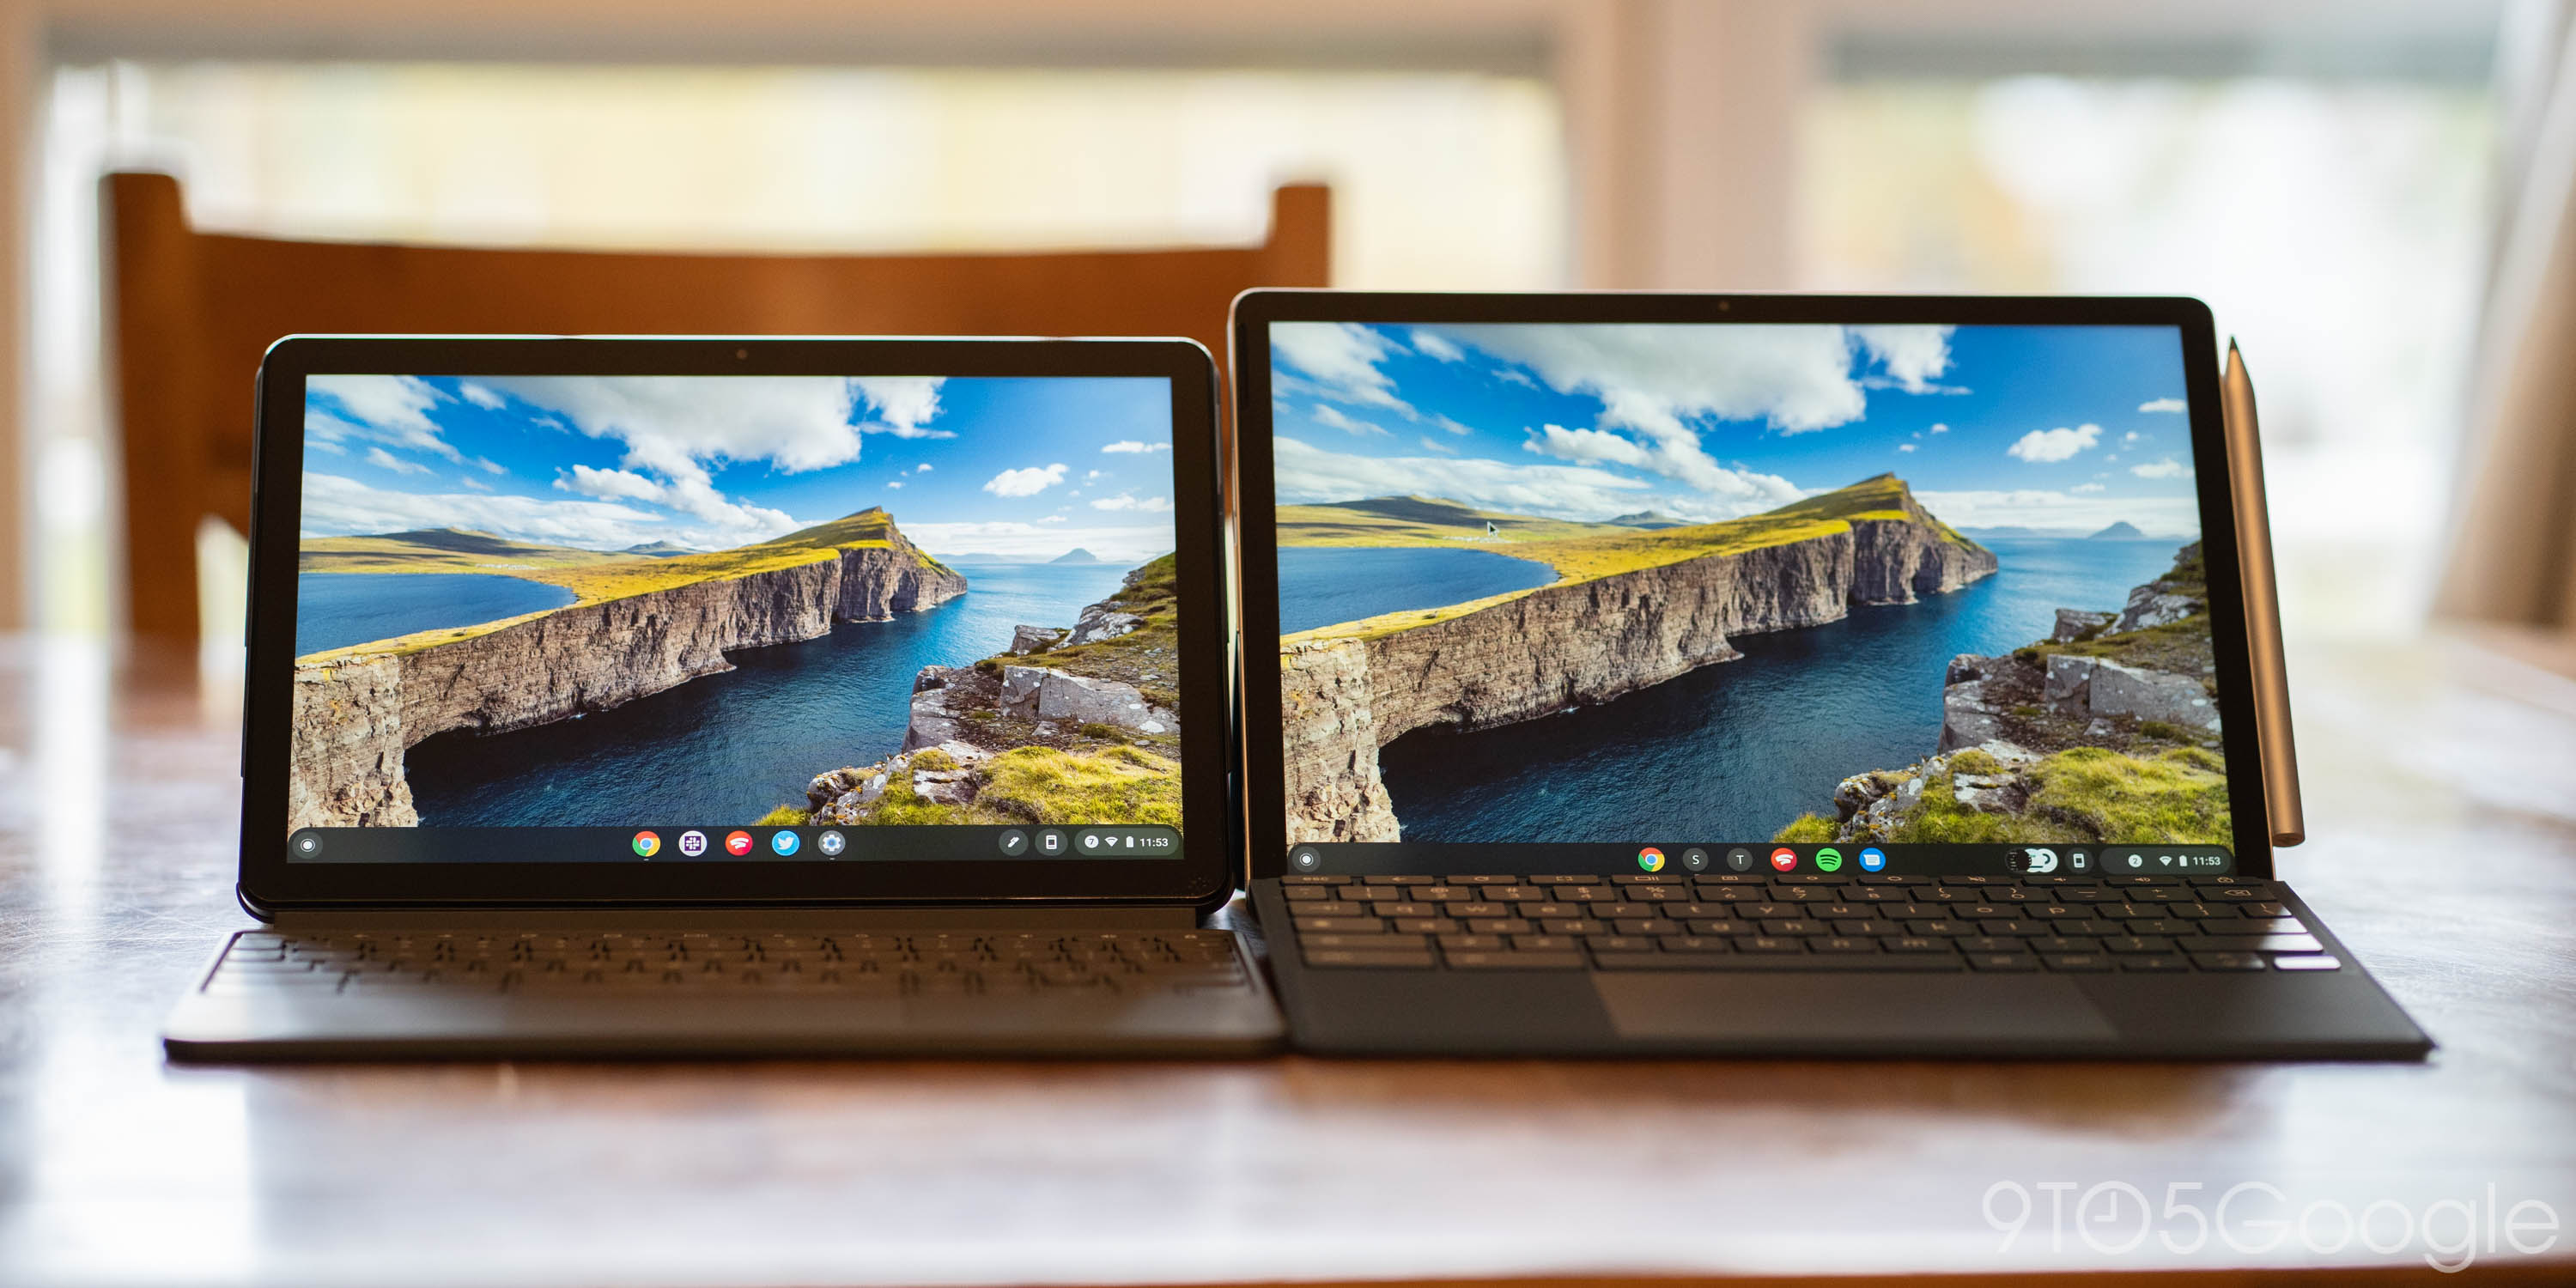 HP Chromebook X2 is close to the ideal Chrome OS tablet - 9to5Google